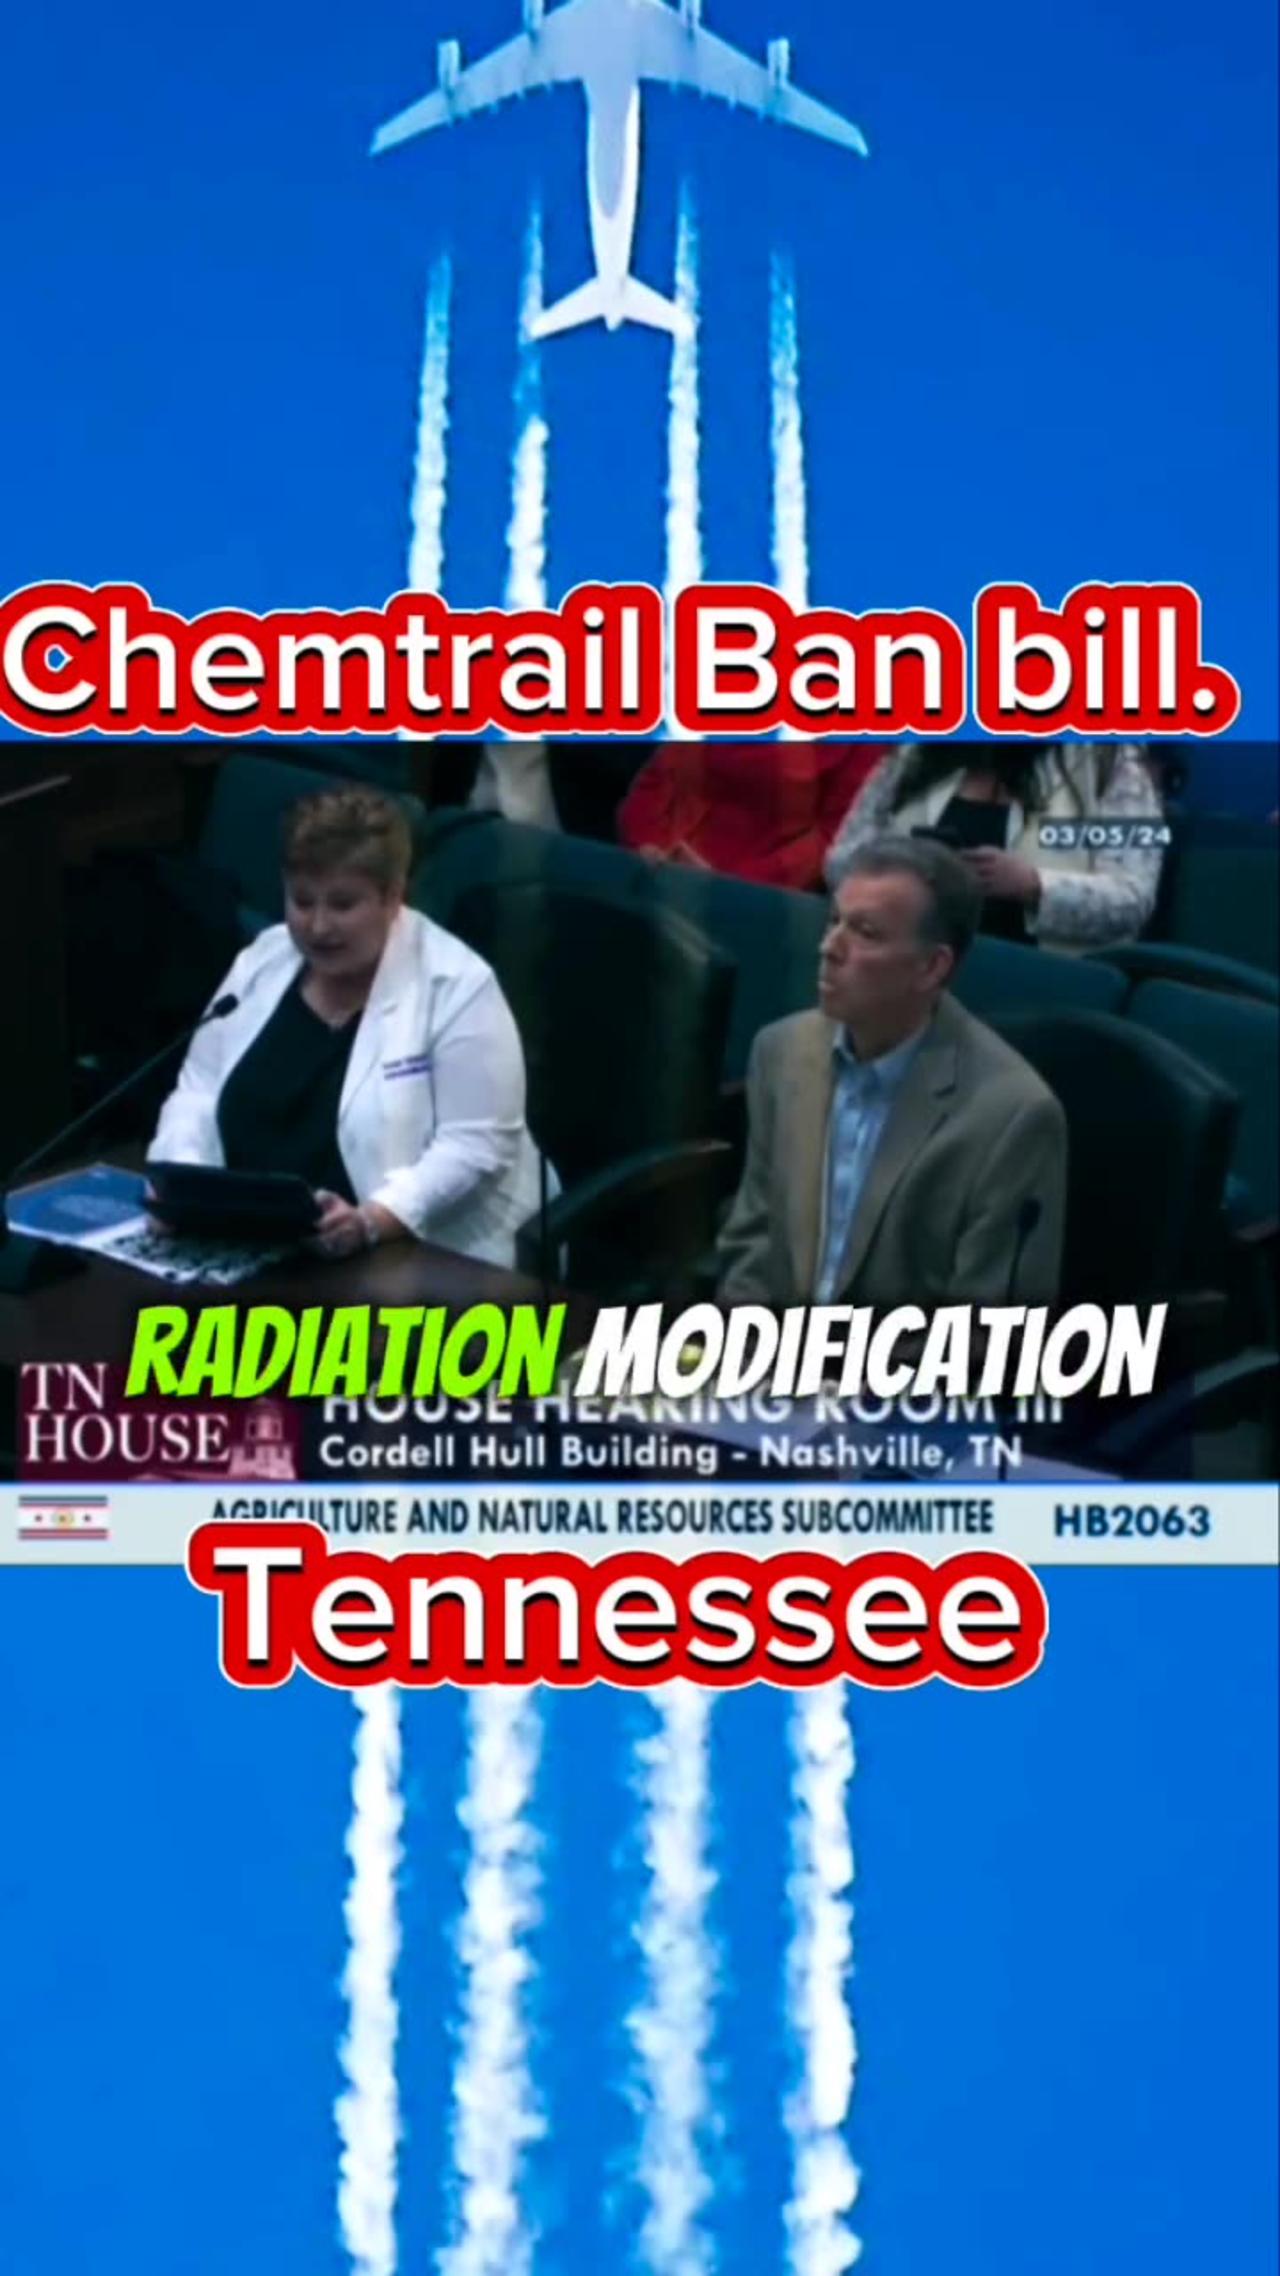 Tennessee house passes bill banning all types of Aerosol injections